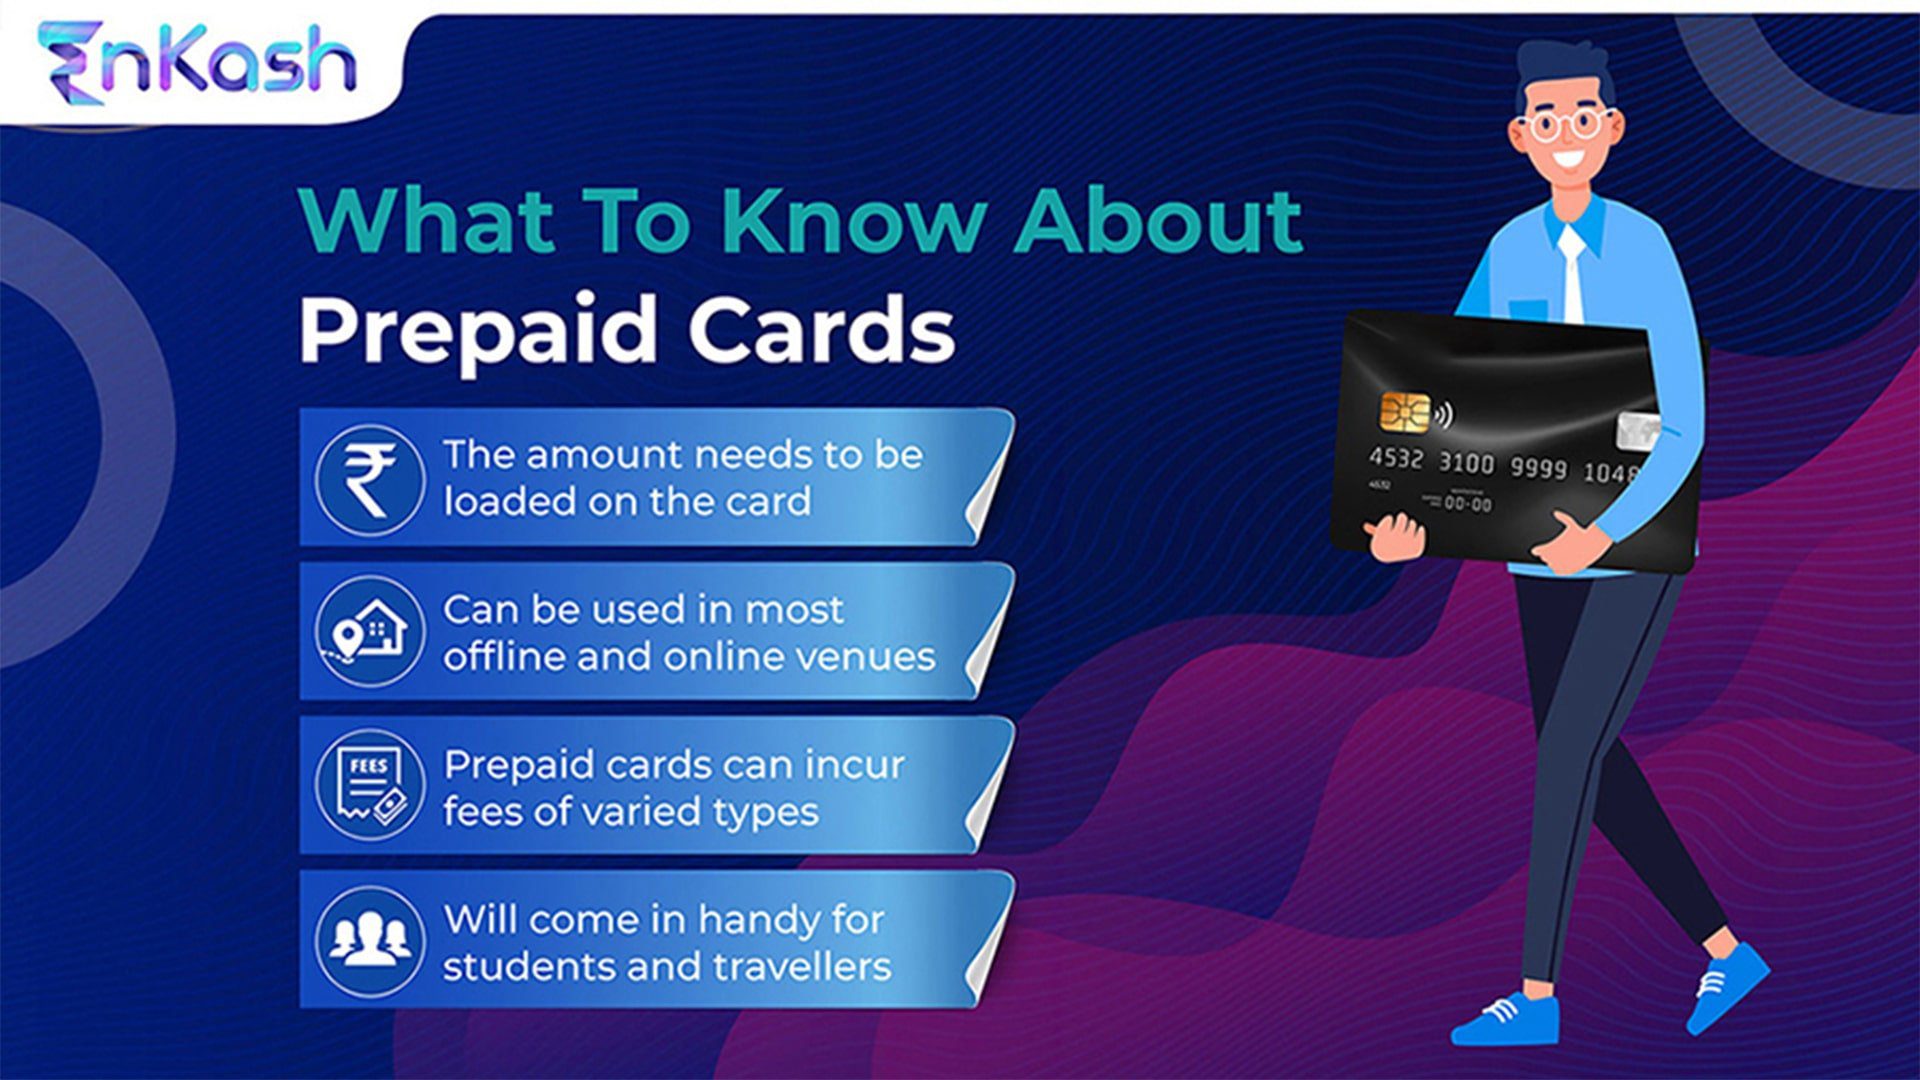 What to know about prepaid cards